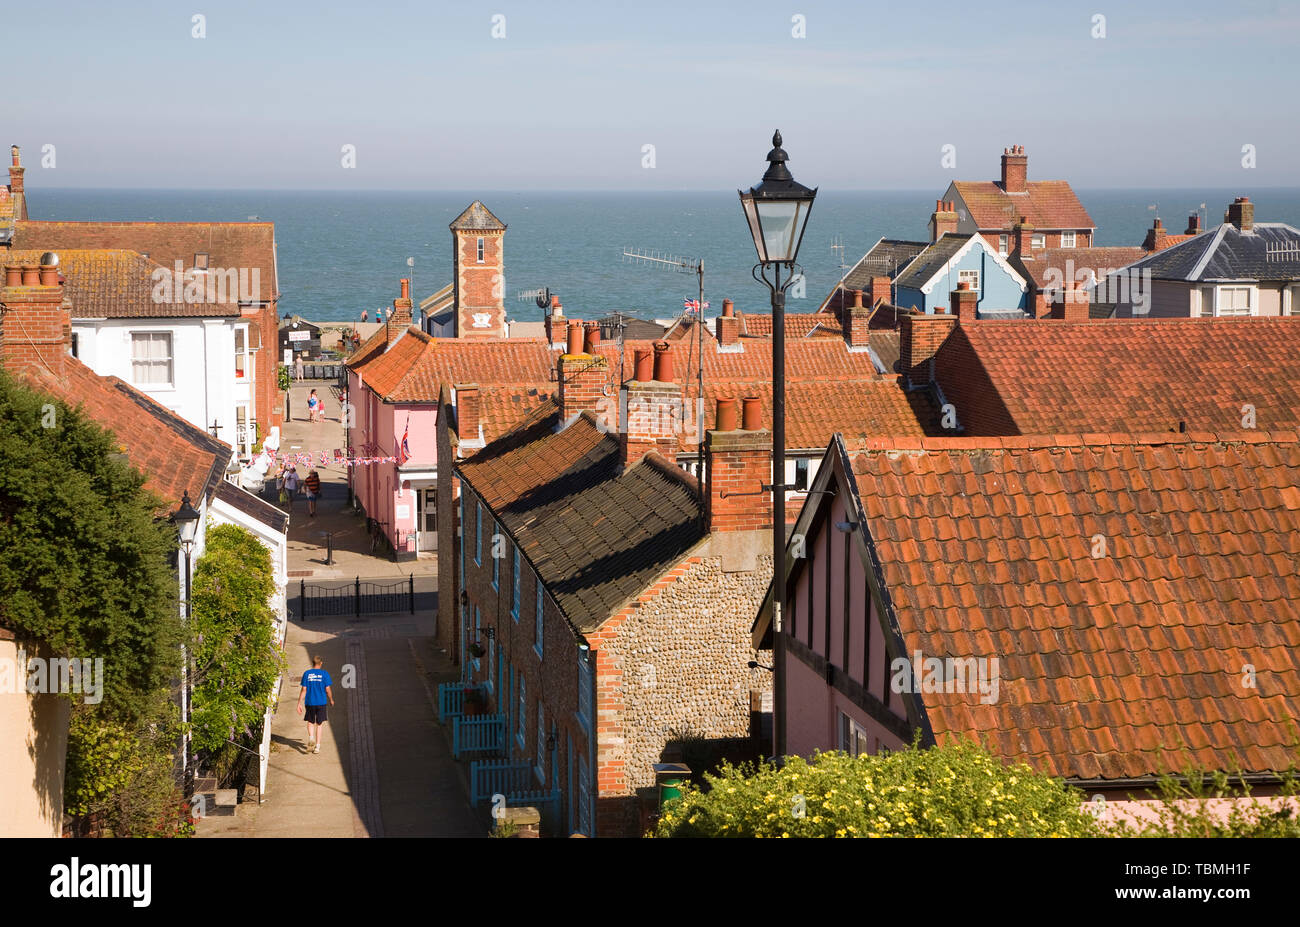 View over pan tiled roof tops out to the North Sea at Aldeburgh, Suffolk, England, UK Stock Photo